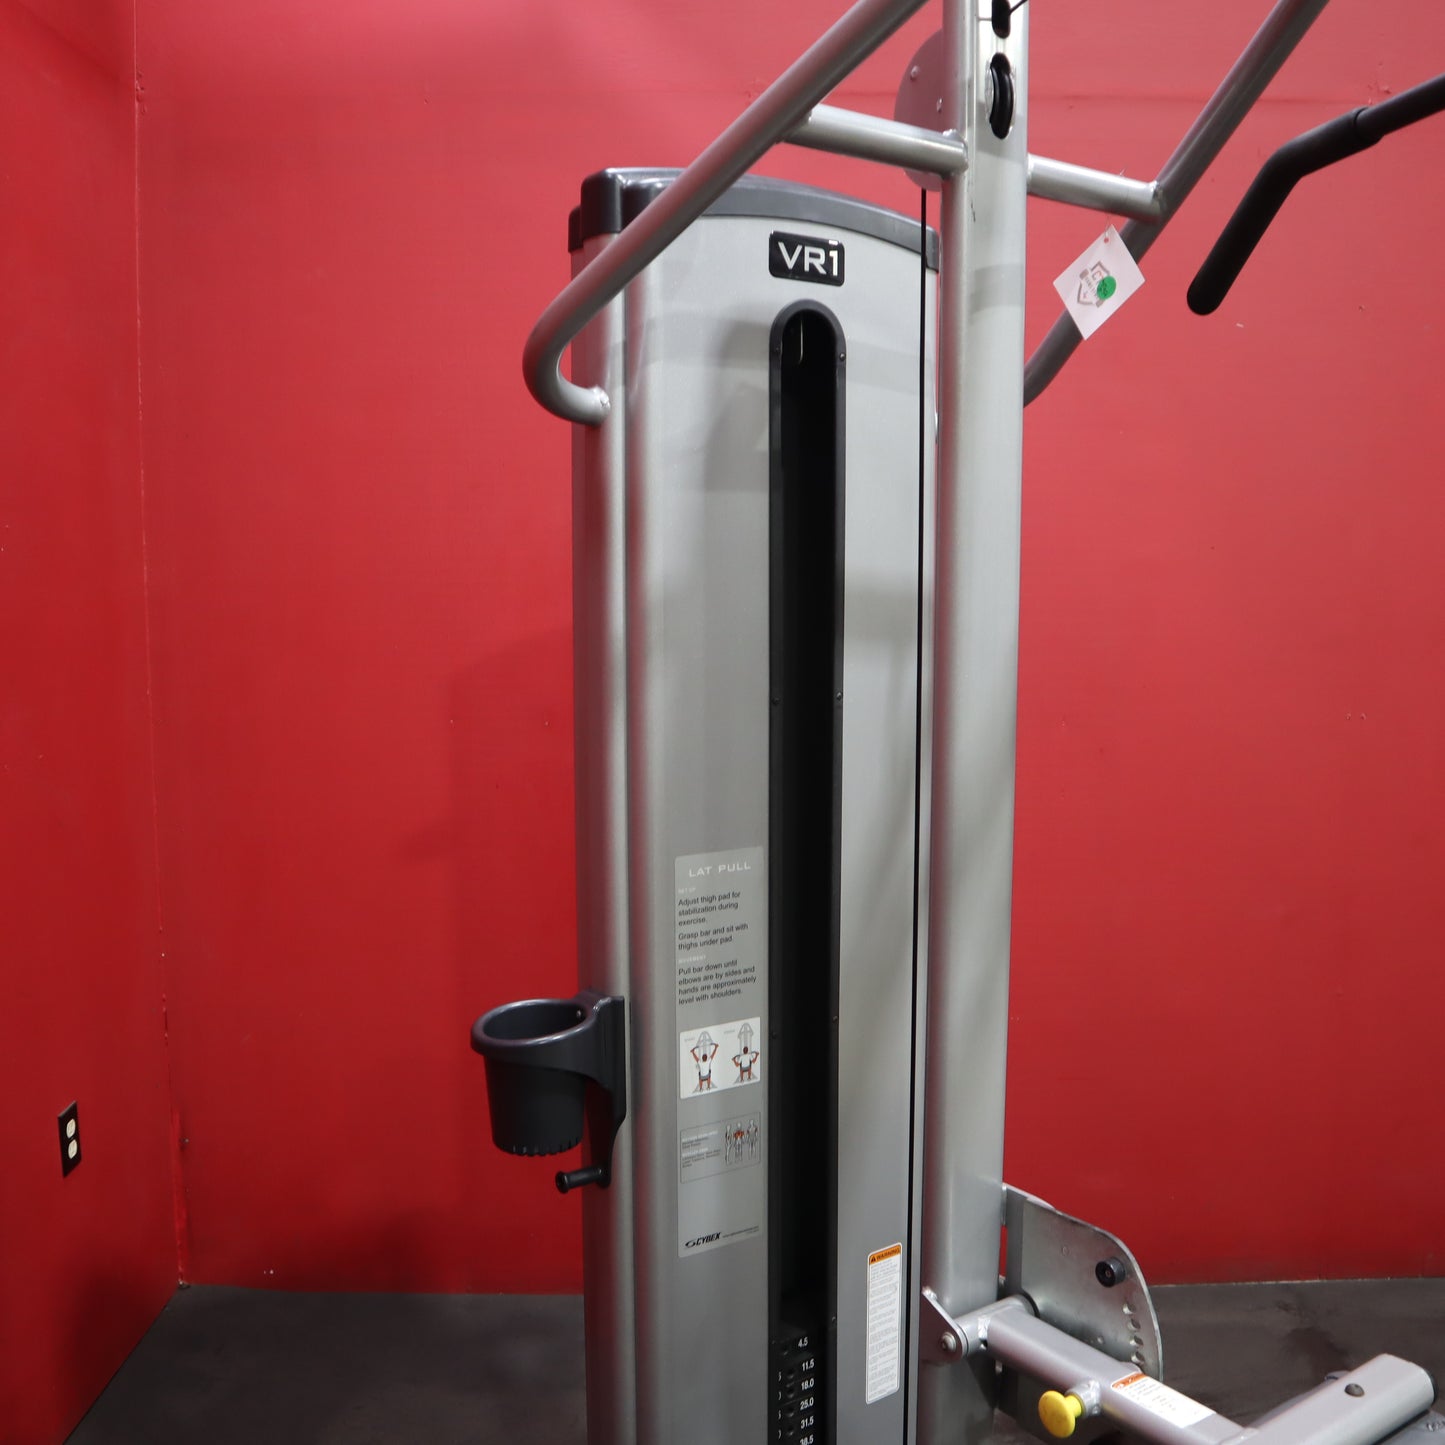 Cybex VR1 Selectorized Lat Pulldown (Refurbished)